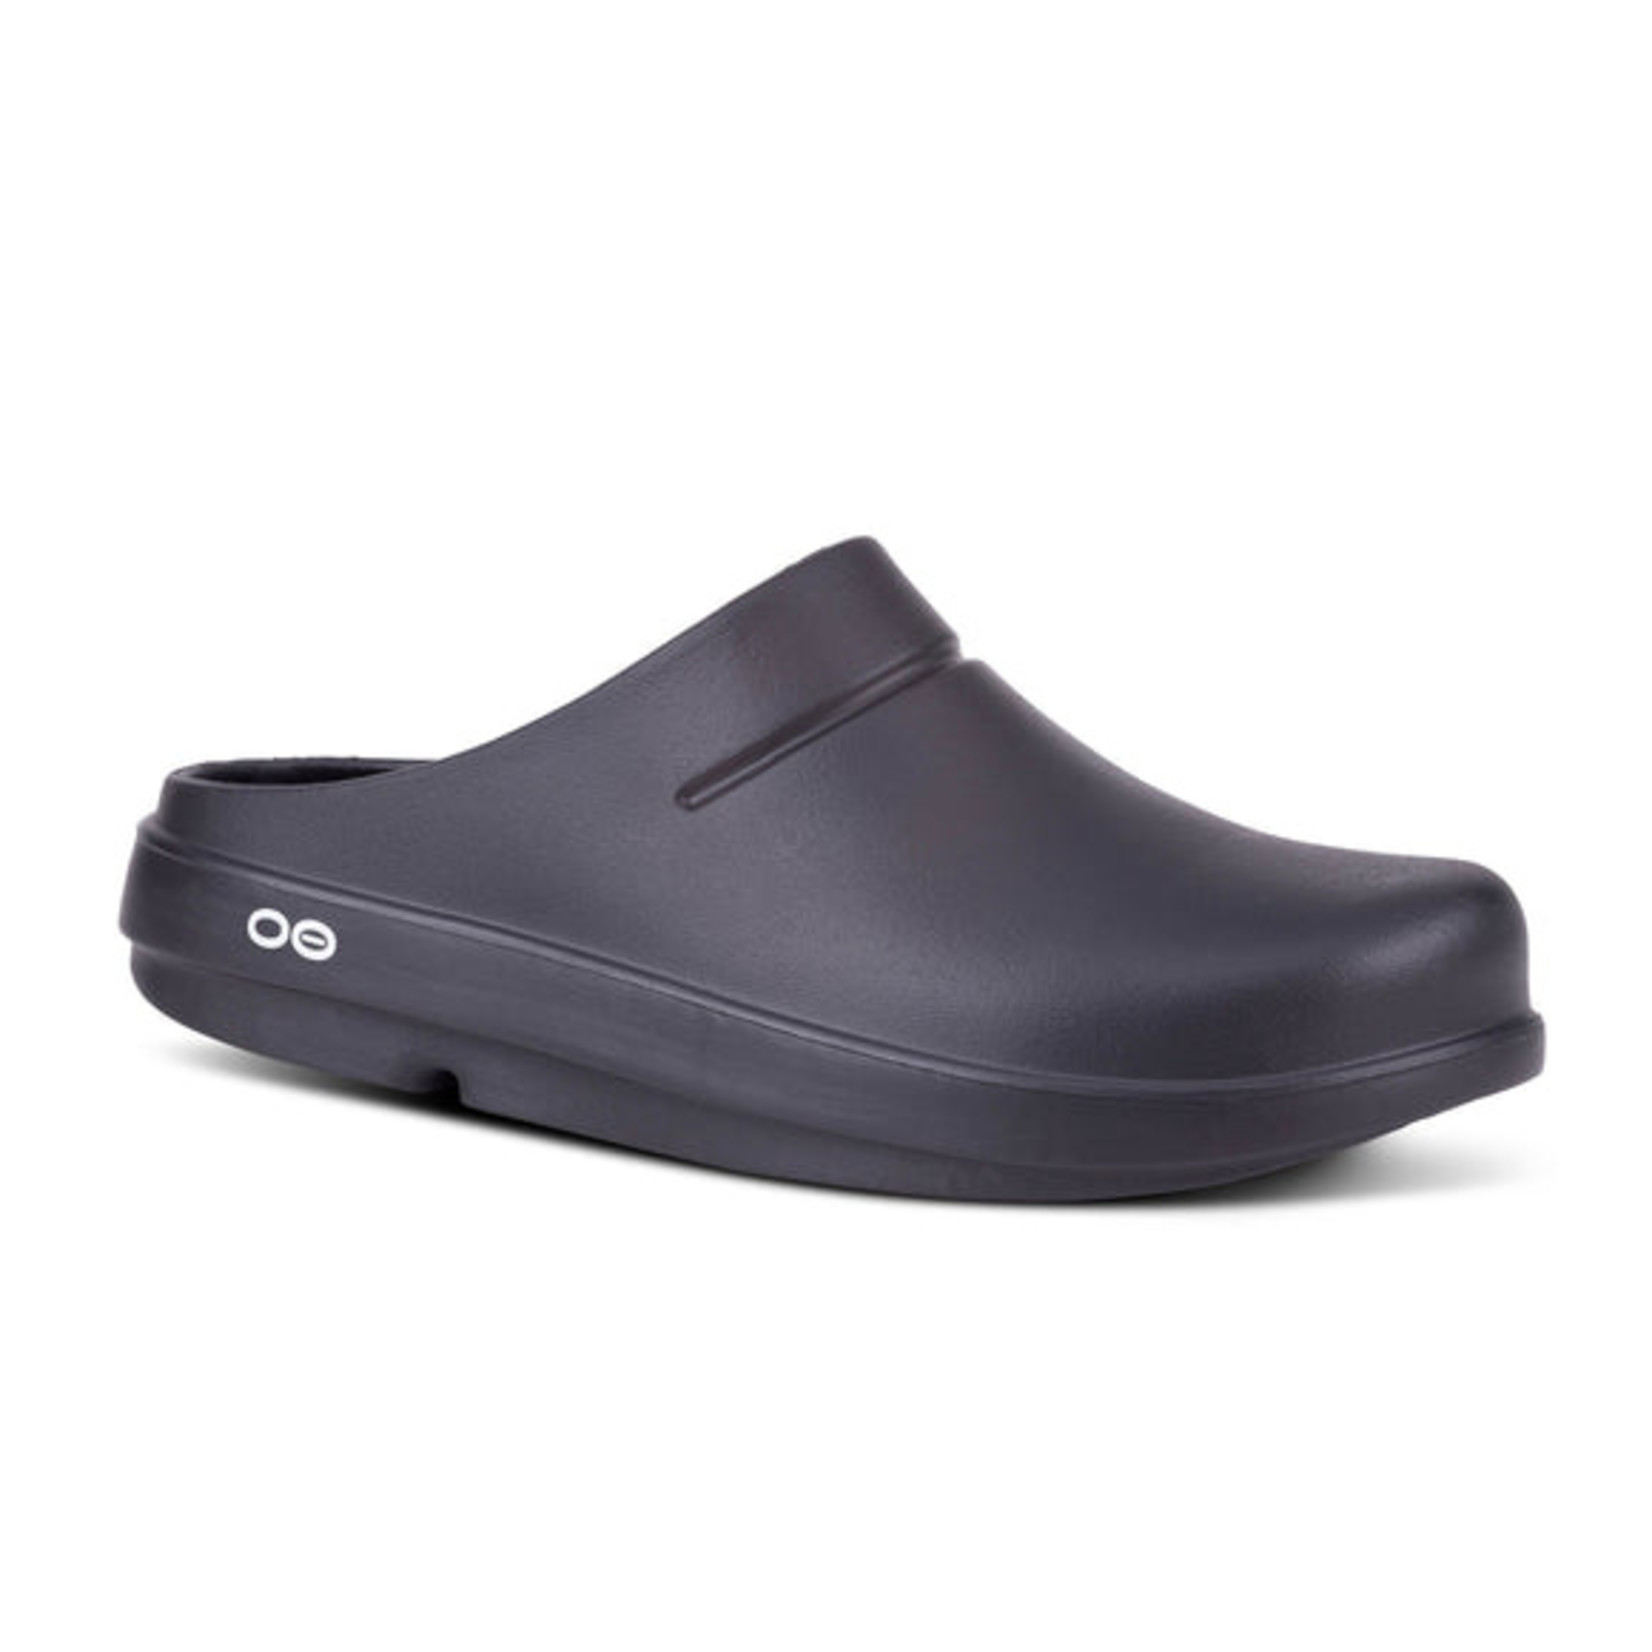 Oofos Oofos Ooclog 1200 Unisex Clogs